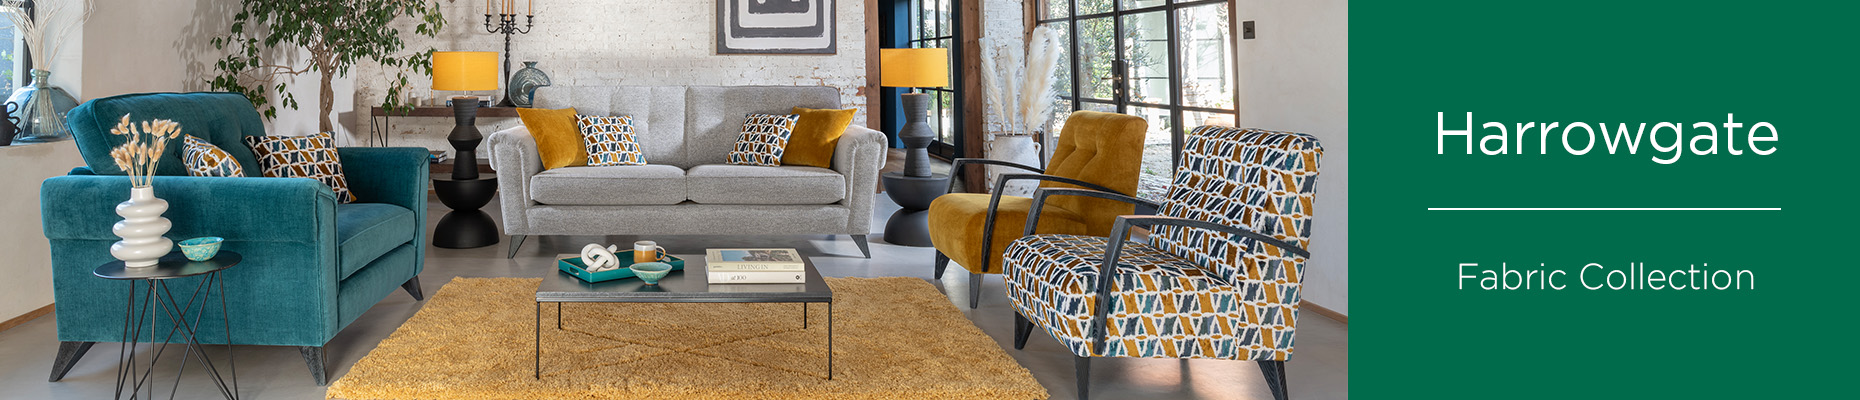 Harrowgate Sofa Collection by Alstons Upholstery at Forrest Furnishing